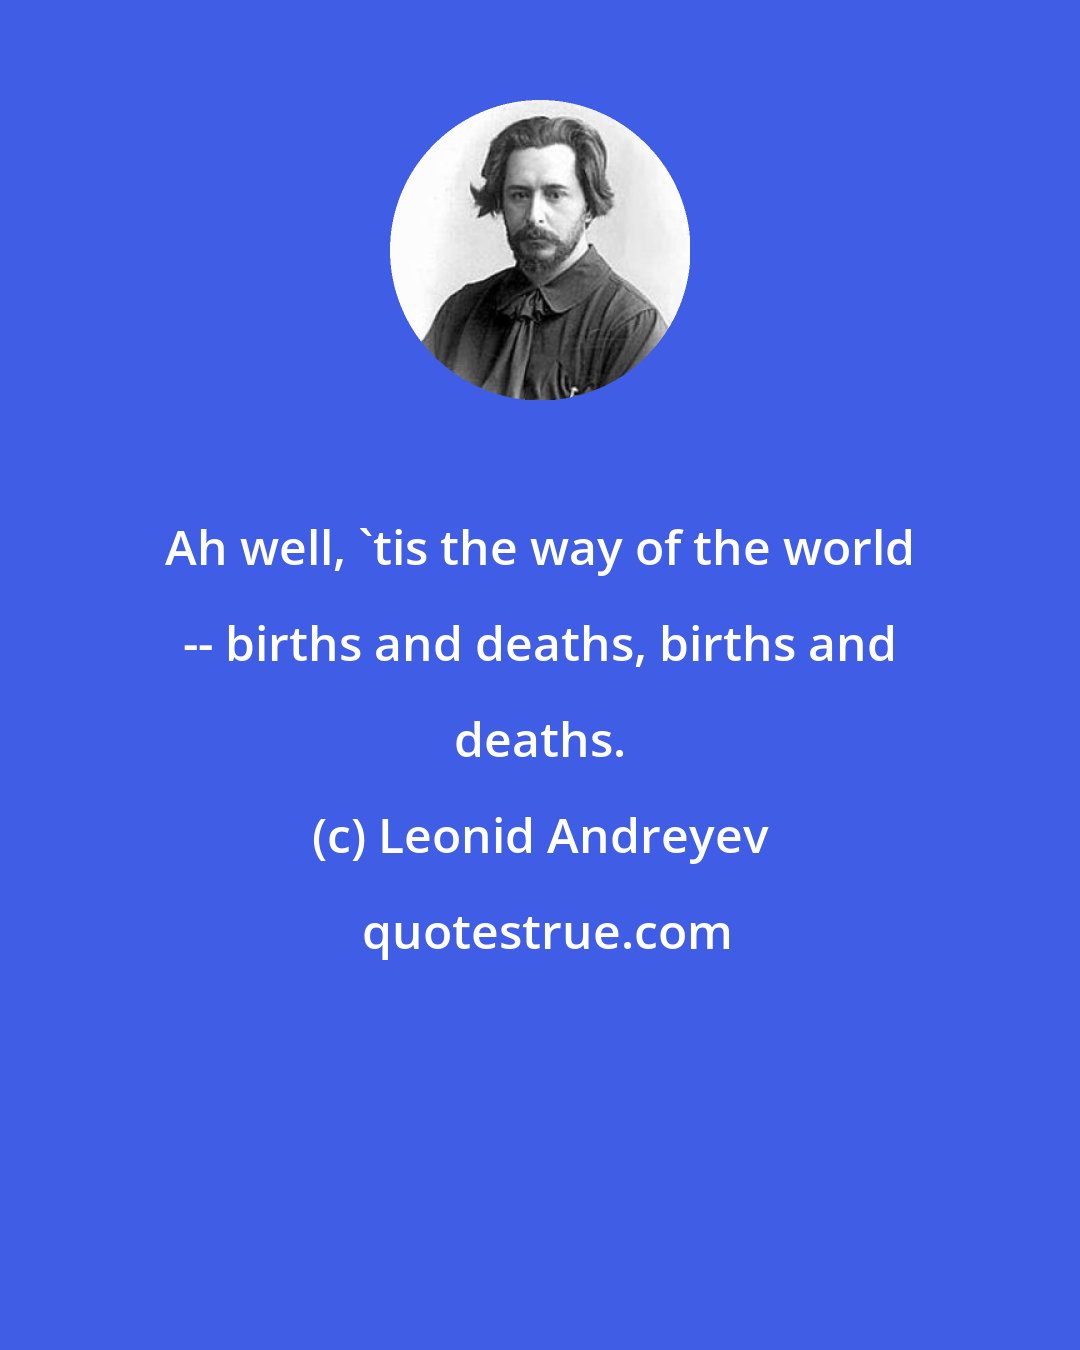 Leonid Andreyev: Ah well, 'tis the way of the world -- births and deaths, births and deaths.